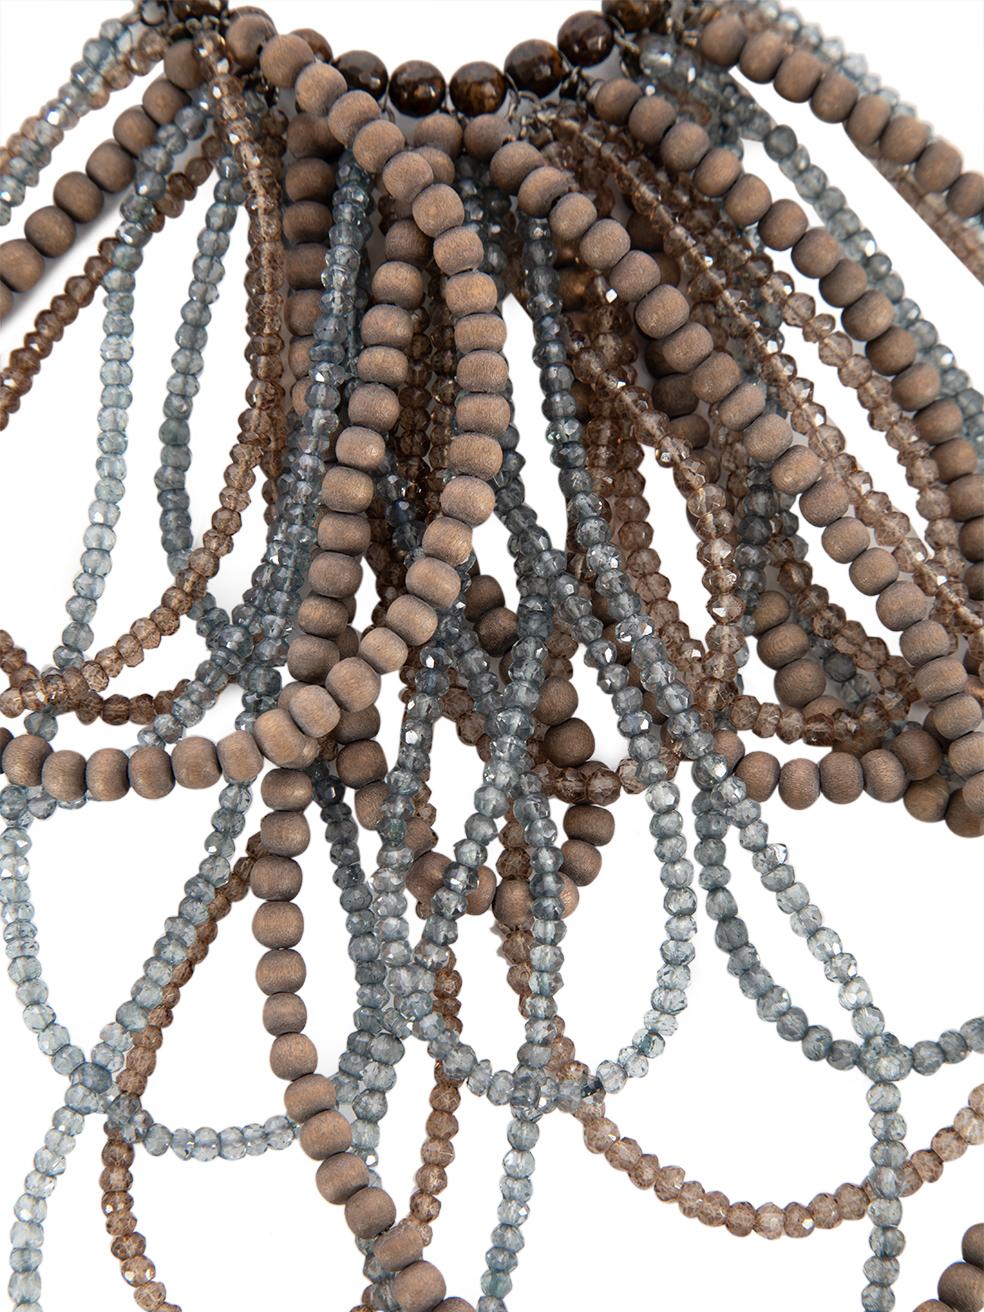 CONDITION is Very good. Minimal wear to necklace is evident. Minimal wear to some of the beads on this used Brunello Cucinelli designer resale item. This item includes the original dustbag and box.  Details  Brown and blue Coated Quartz, Bronzite &